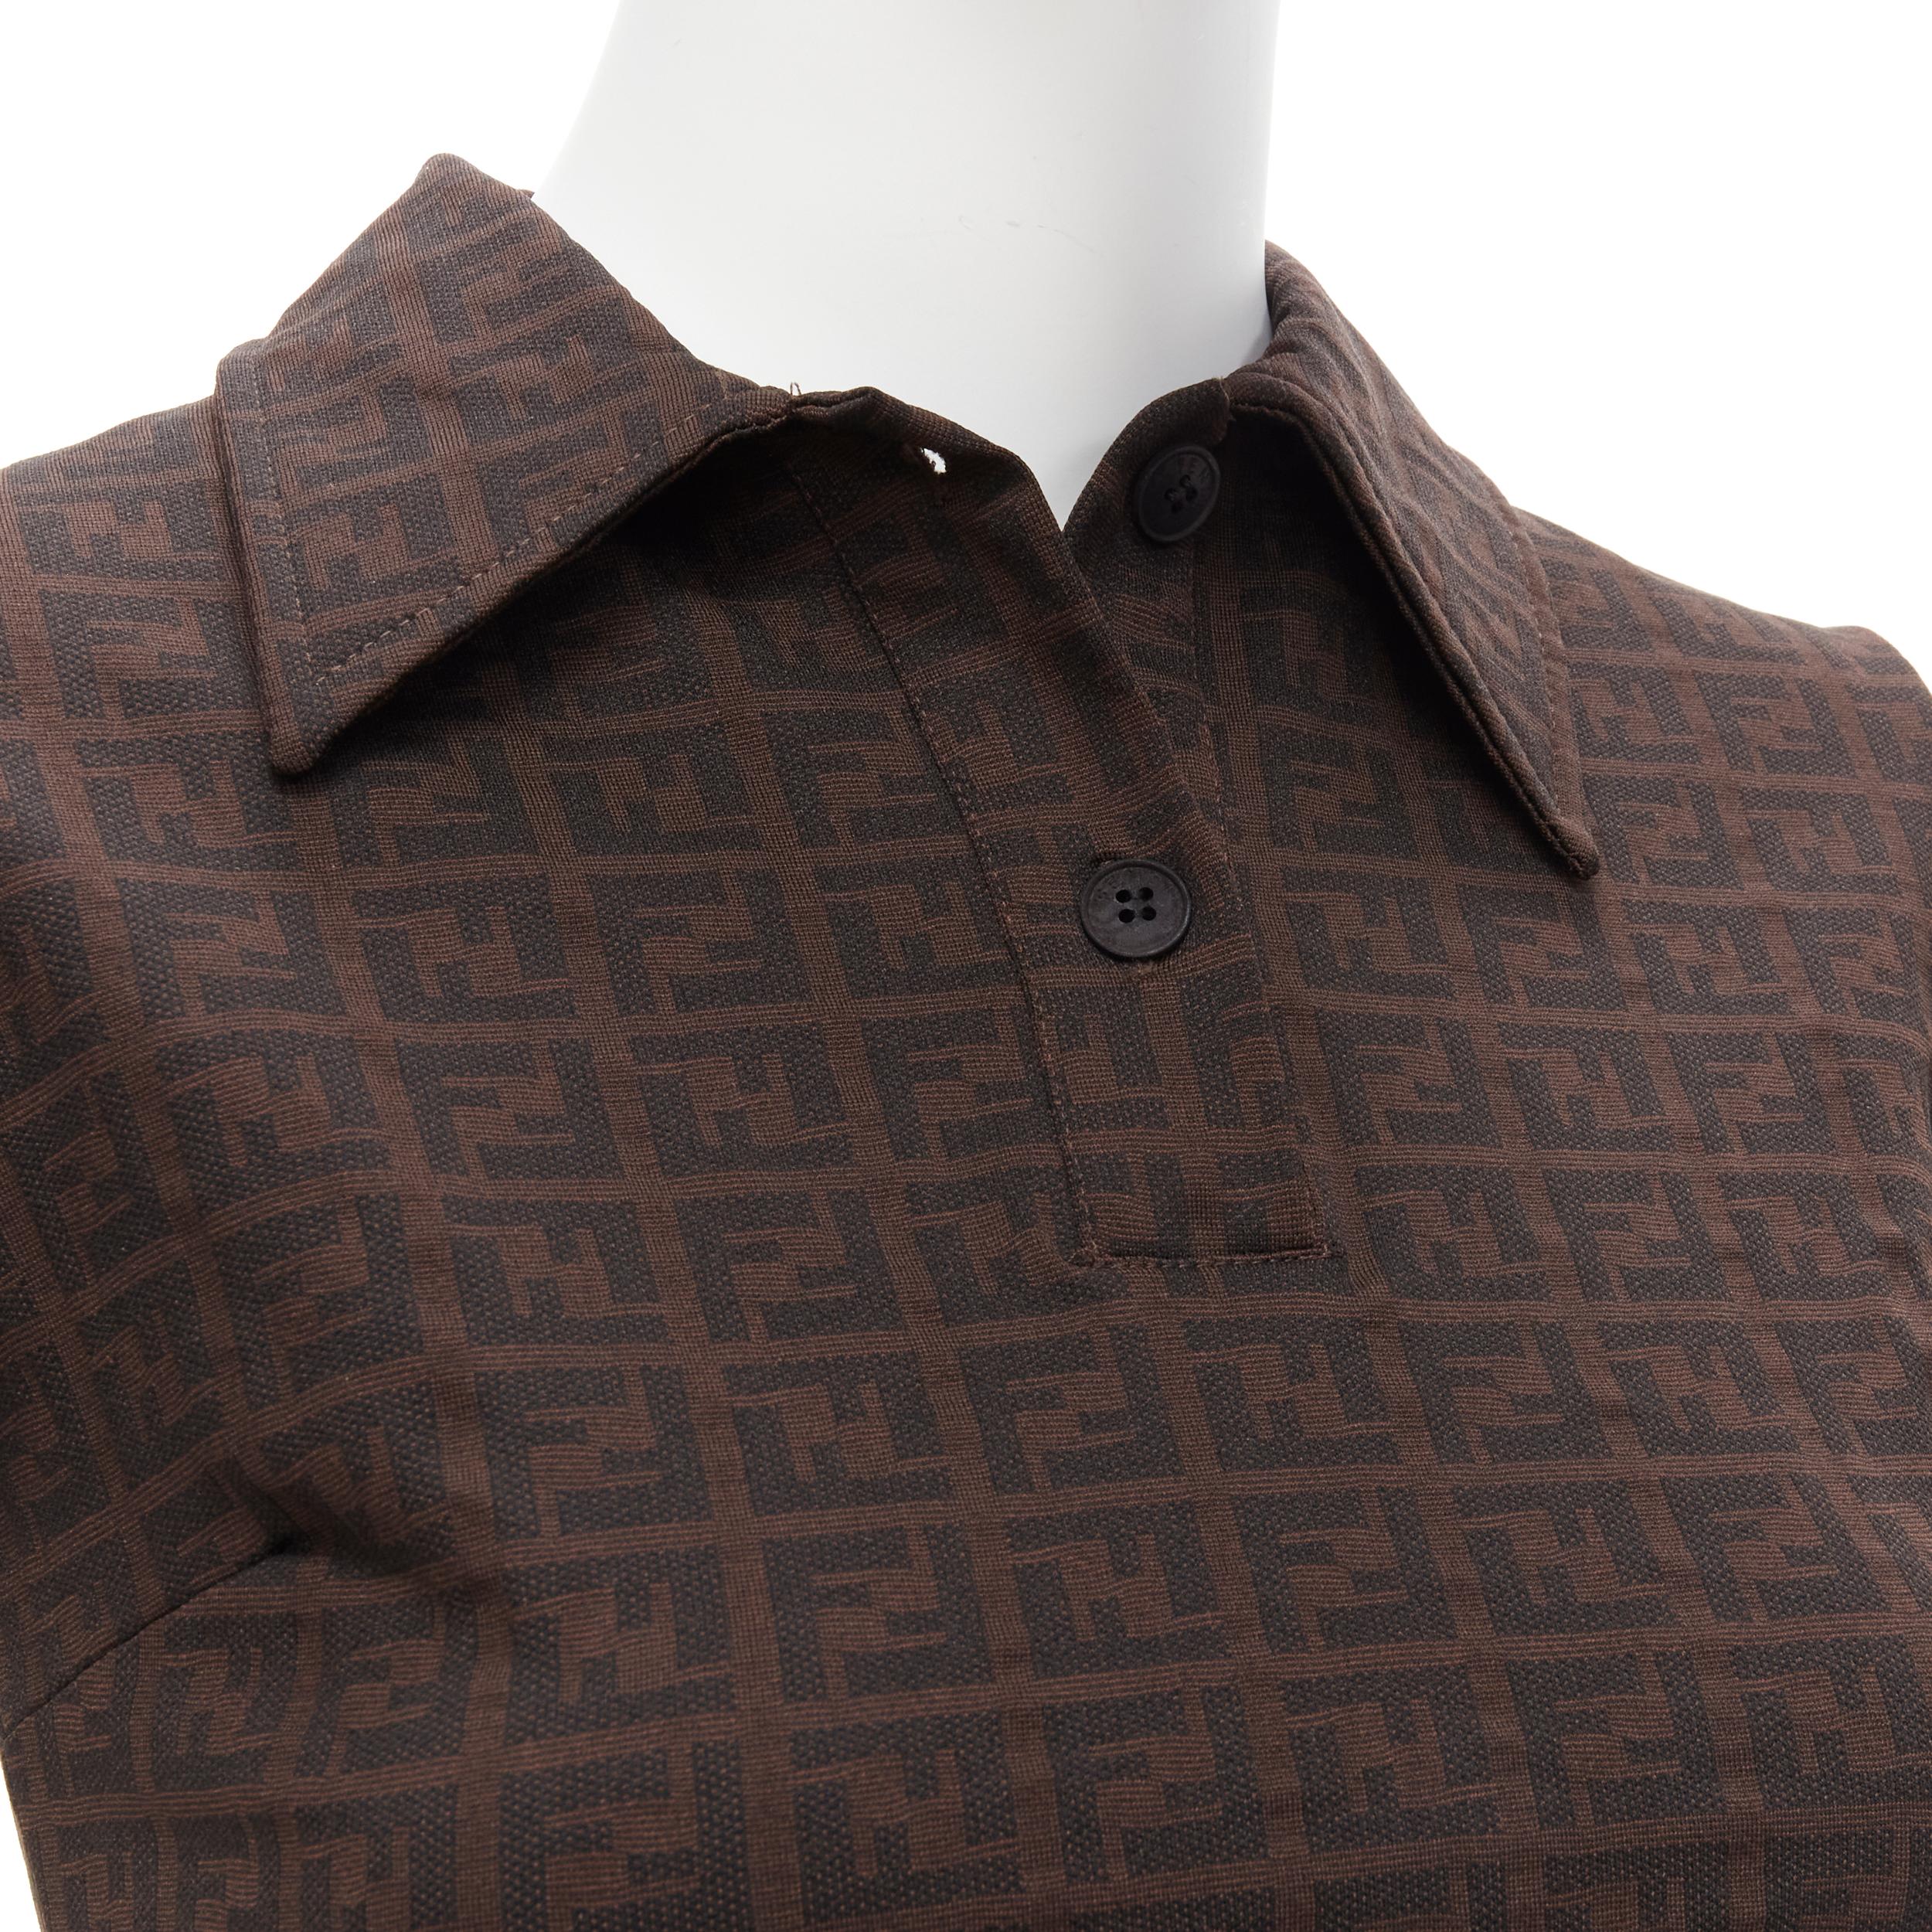 FENDI MARE Vintage brown FF Zucca monogram jacquard polo top IT40 S
Reference: TGAS/D00305
Brand: Fendi
Collection: Mare
Material: Polyamide, Blend
Color: Brown
Pattern: Monogram
Closure: Button
Extra Details: Bust darts flatter the chest.
Made in: